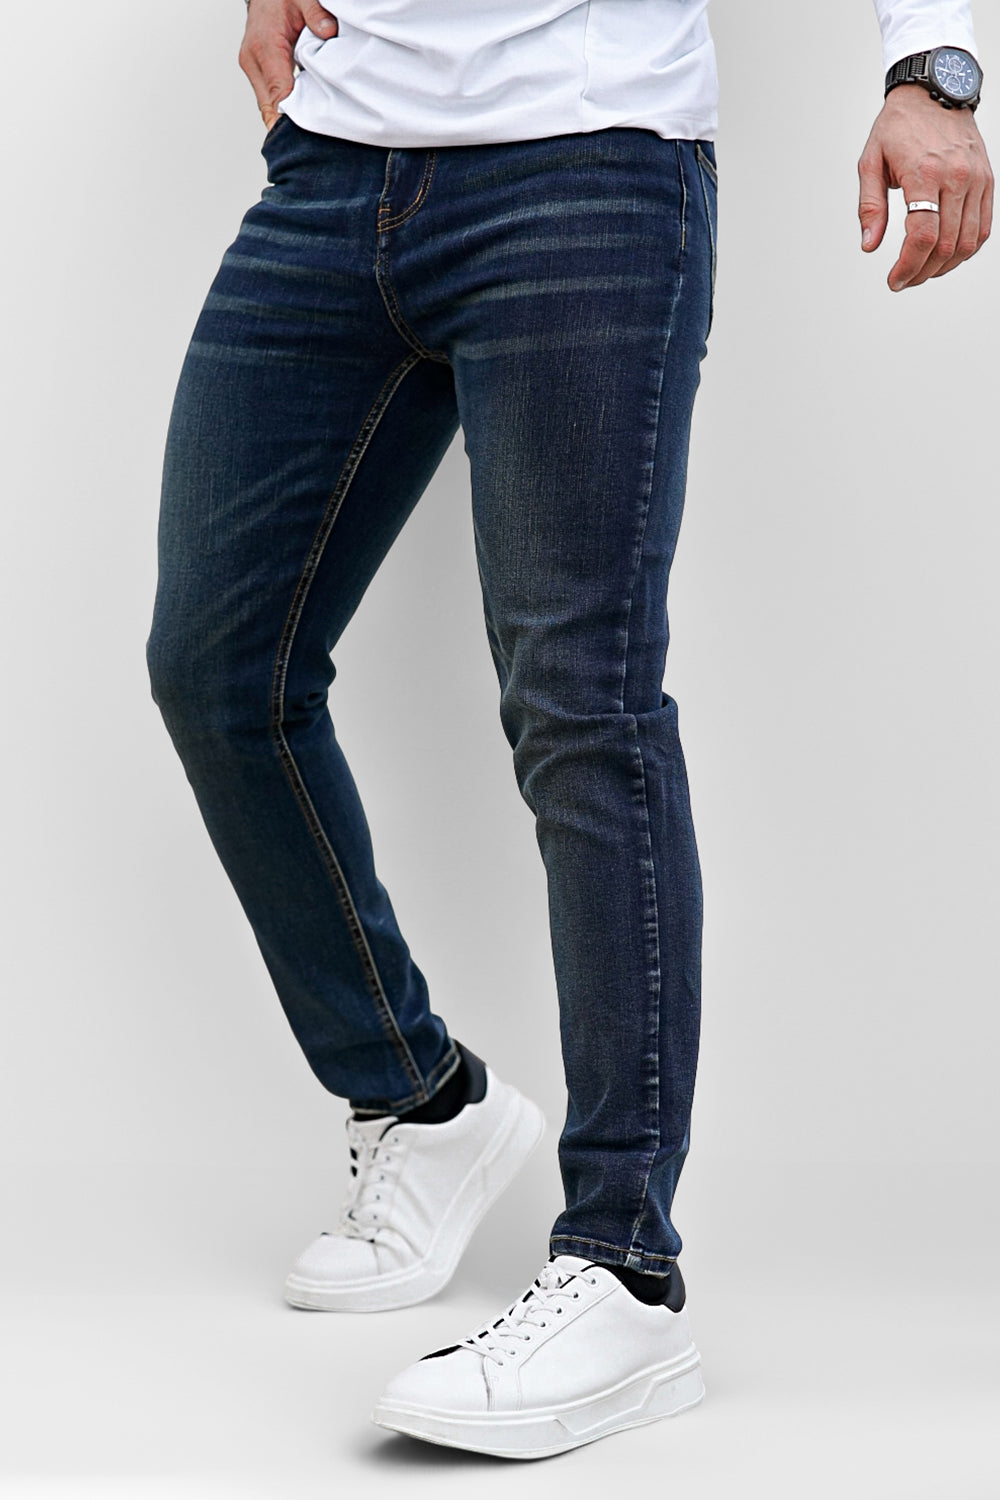 Gingtto Men's Jeans Slim Tapered - Navy Blue